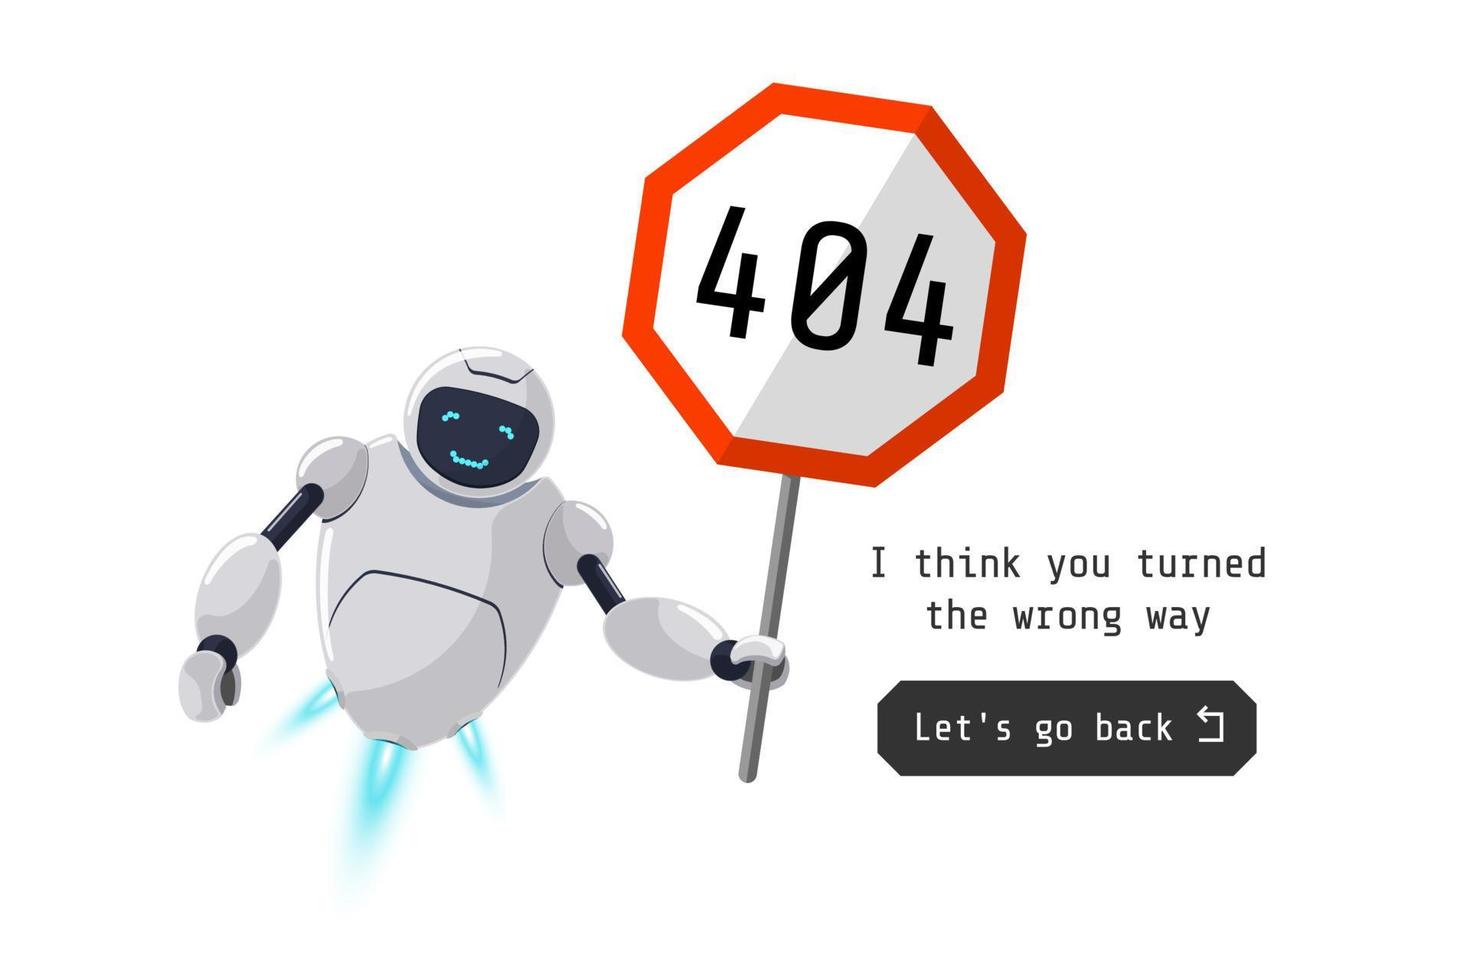 Website page not found. Wrong URL address error 404. Smiling robot character holding red road sign. Site crash on technical work. Web design template with chatbot mascot. Online bot assistance failure vector